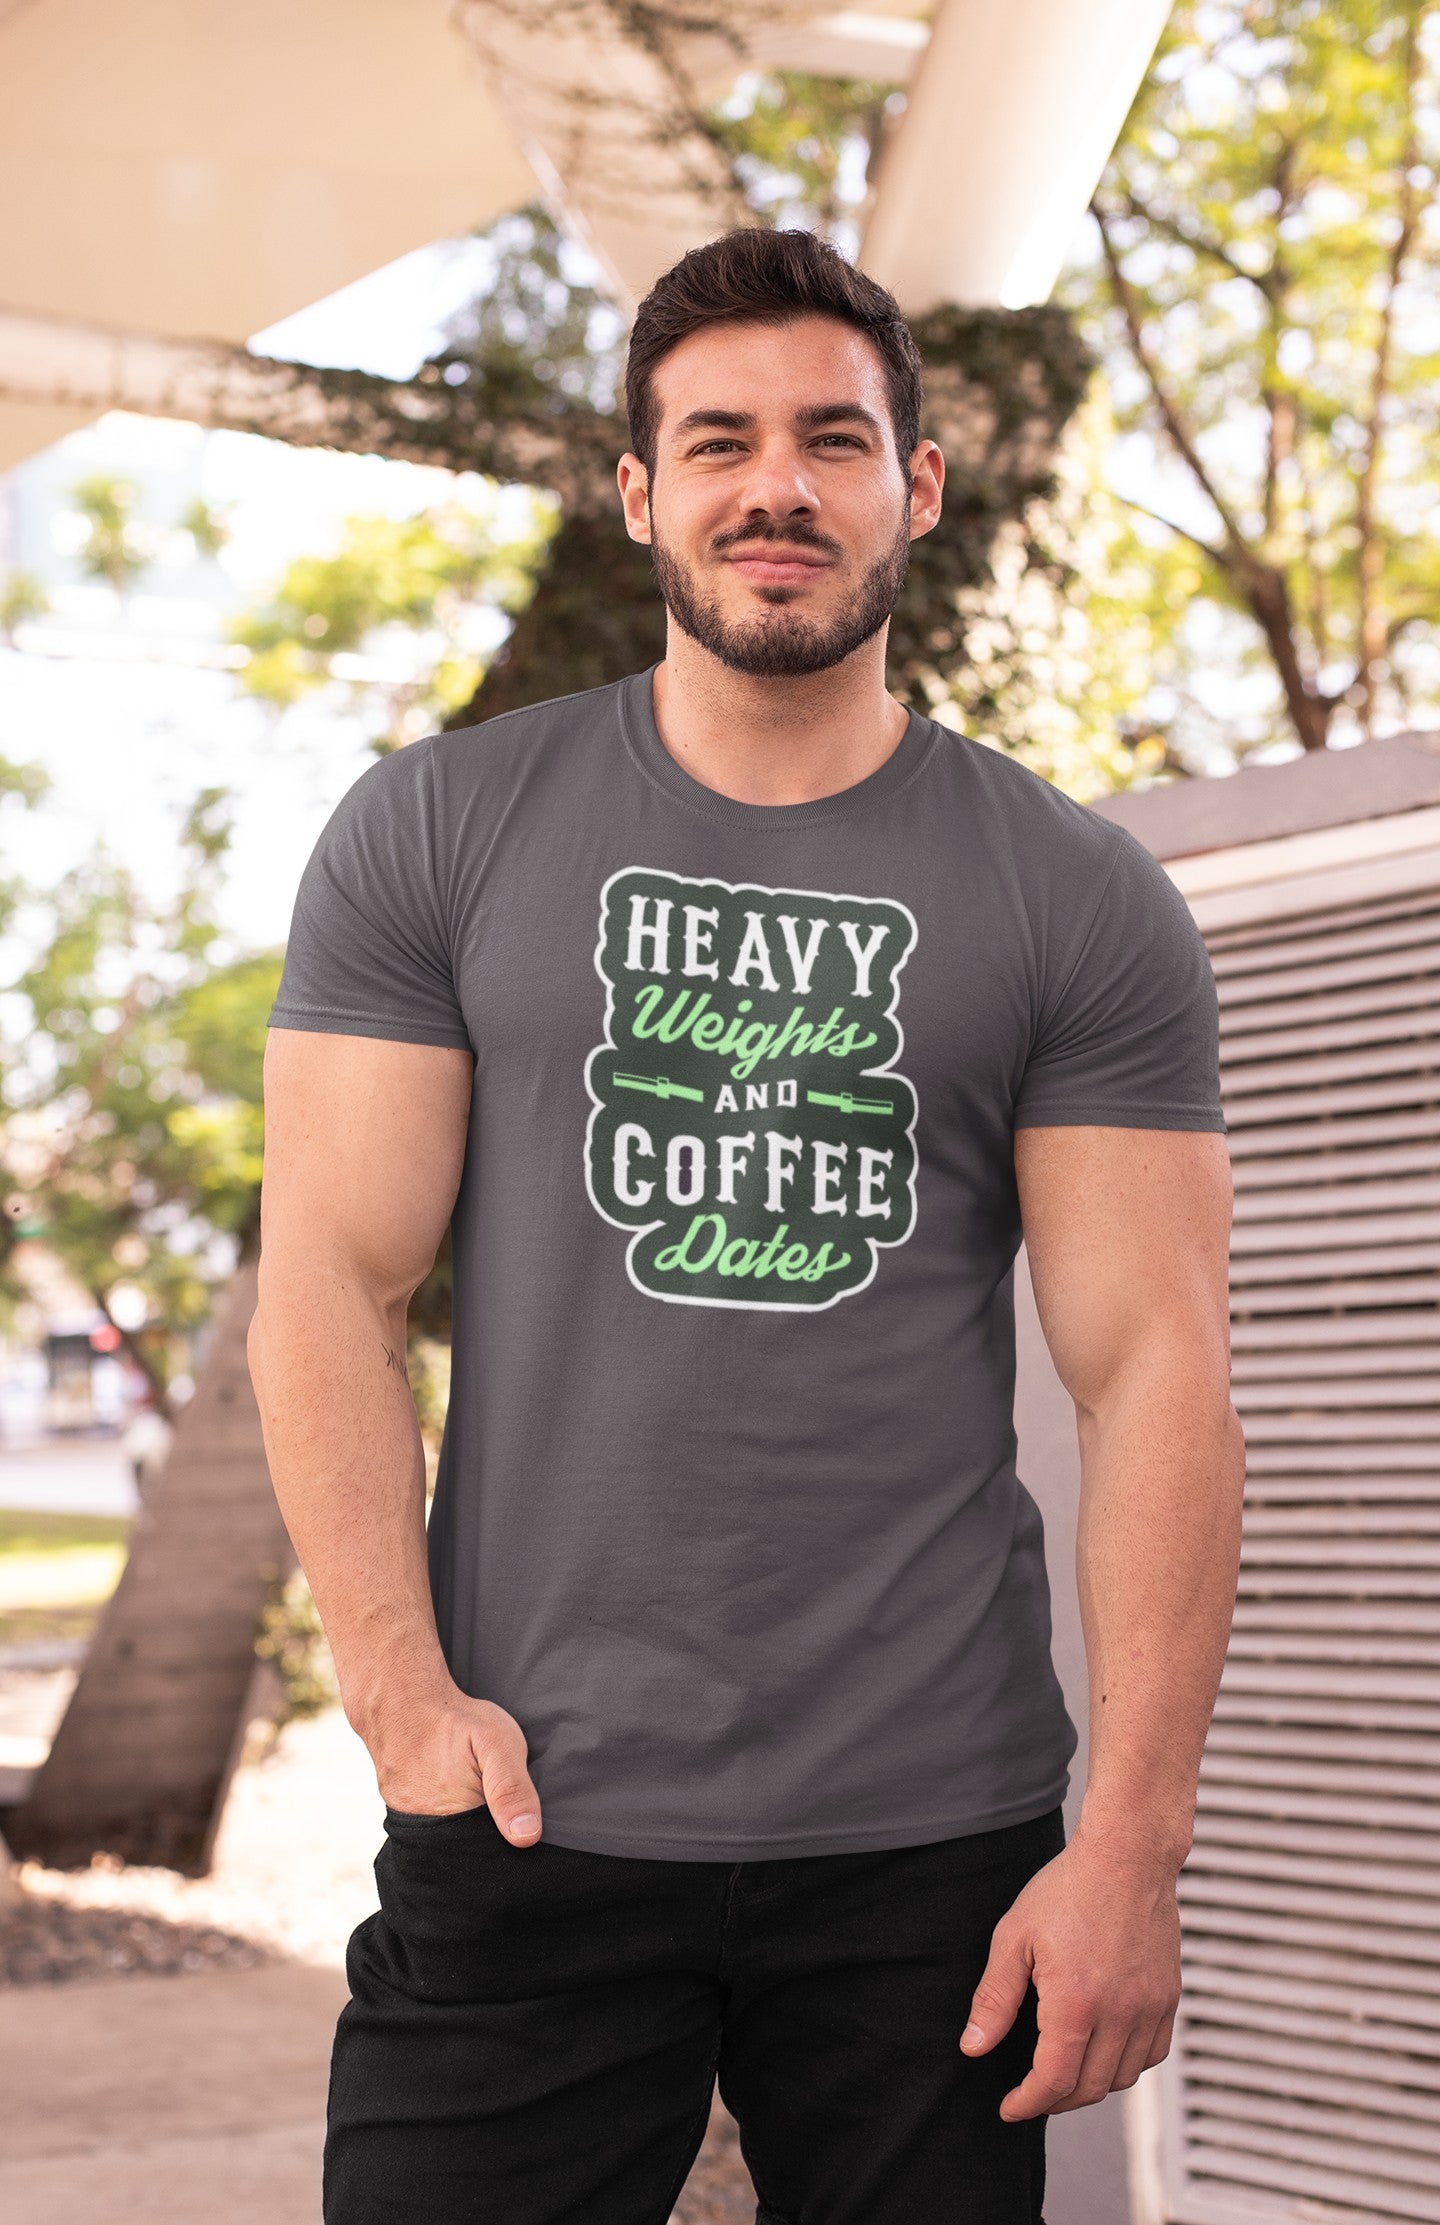 Gym T Shirt - Heavy Weights And Coffee Dates - Sports T Shirt - Strong Soul